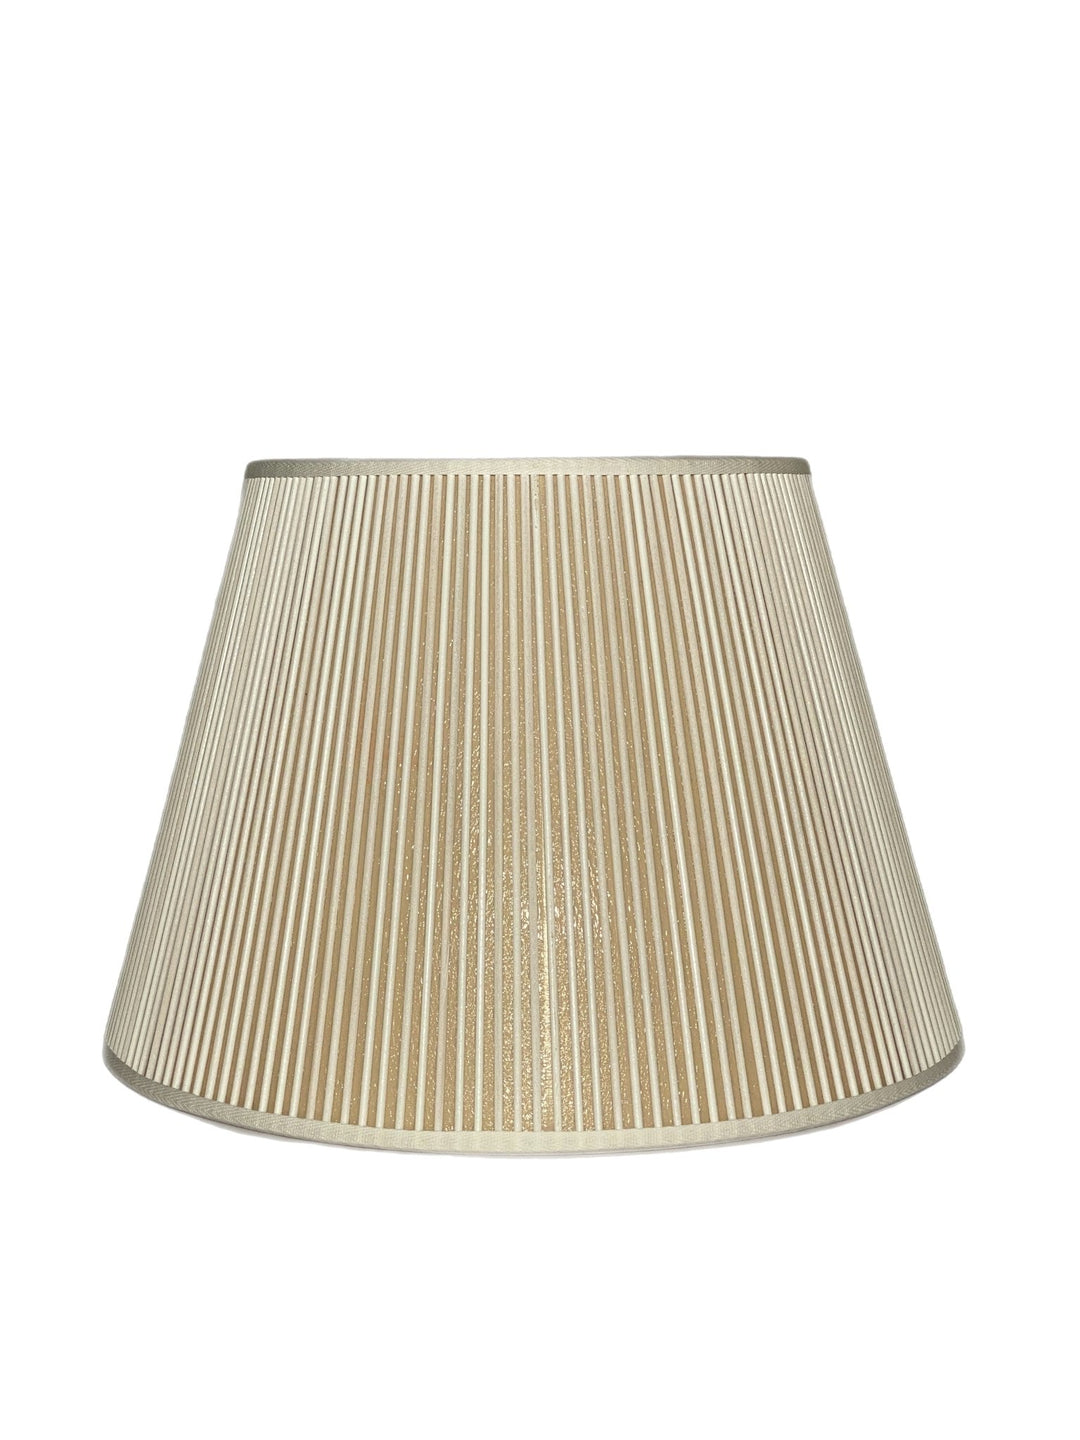 White Stick with Tan Paper British Empire Stick Lamp Shade - (2) 16" in stock - Lux Lamp Shades